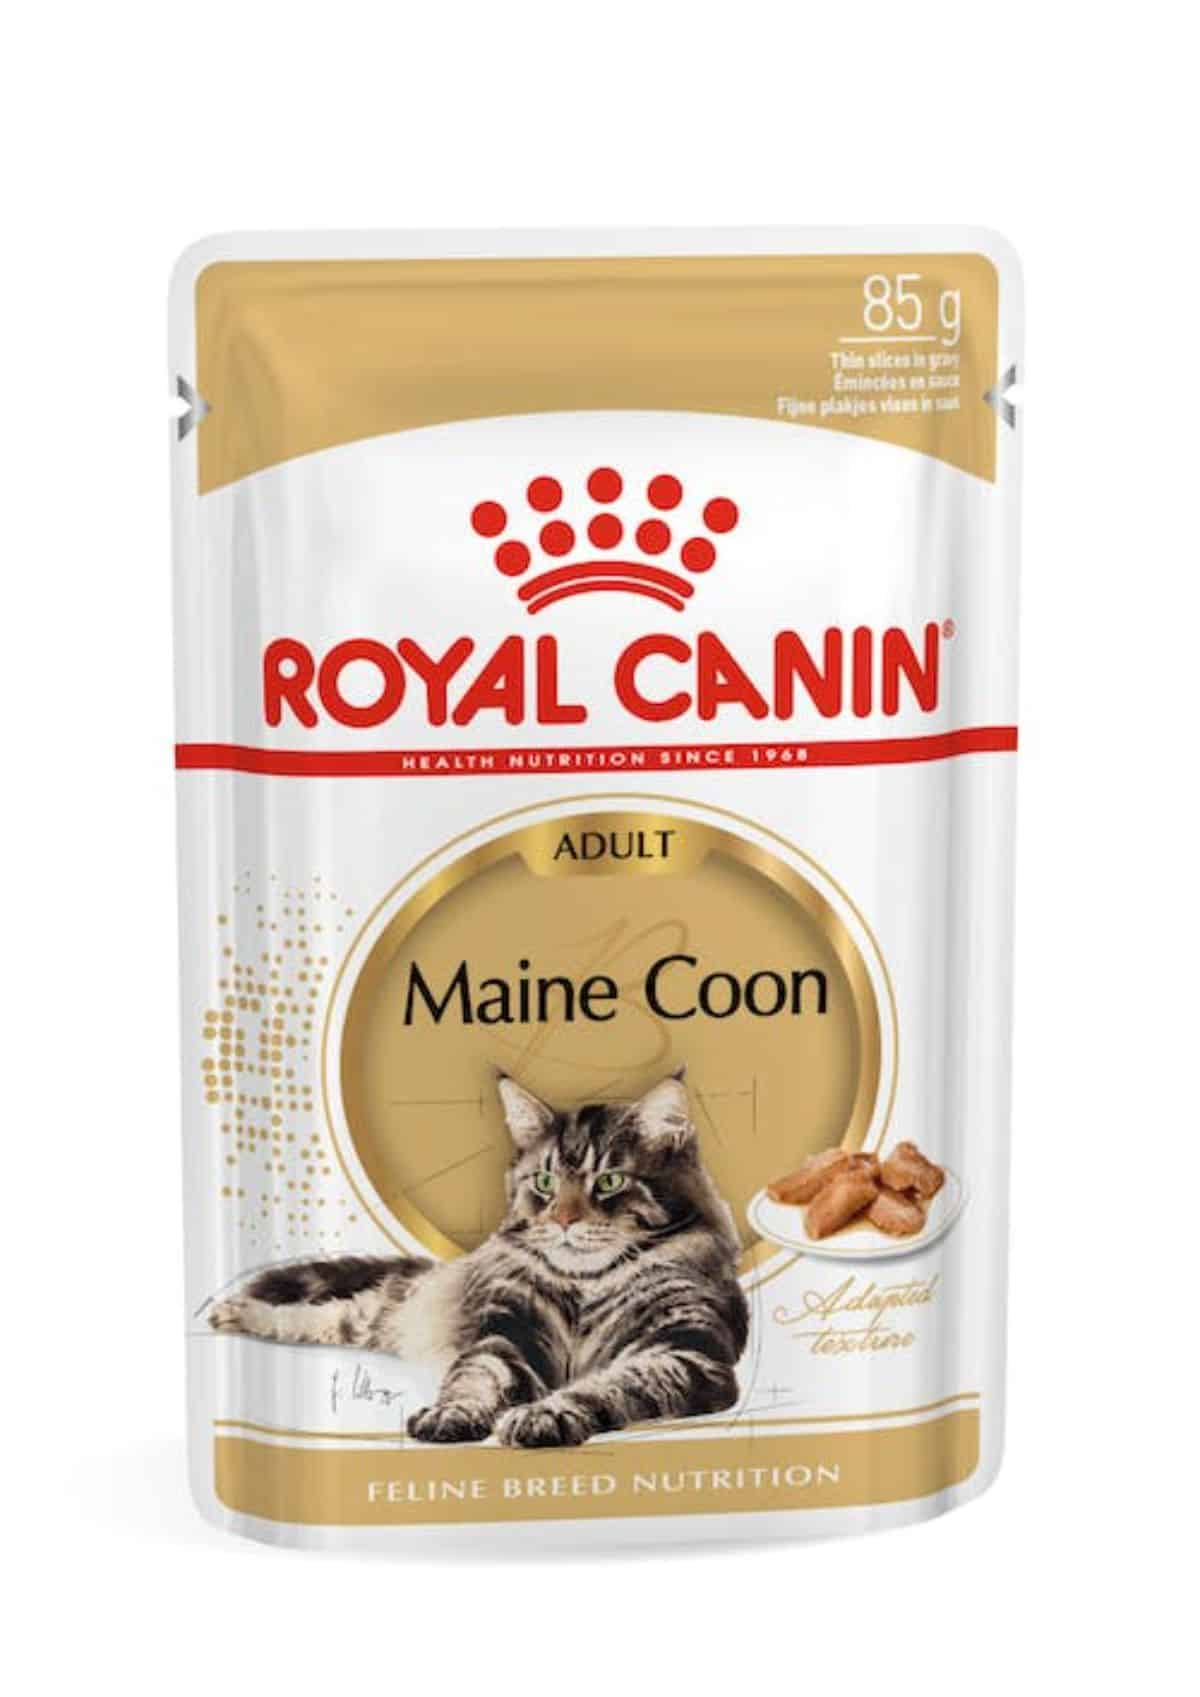 Royal Canin Adult Maine Coon Wet Food